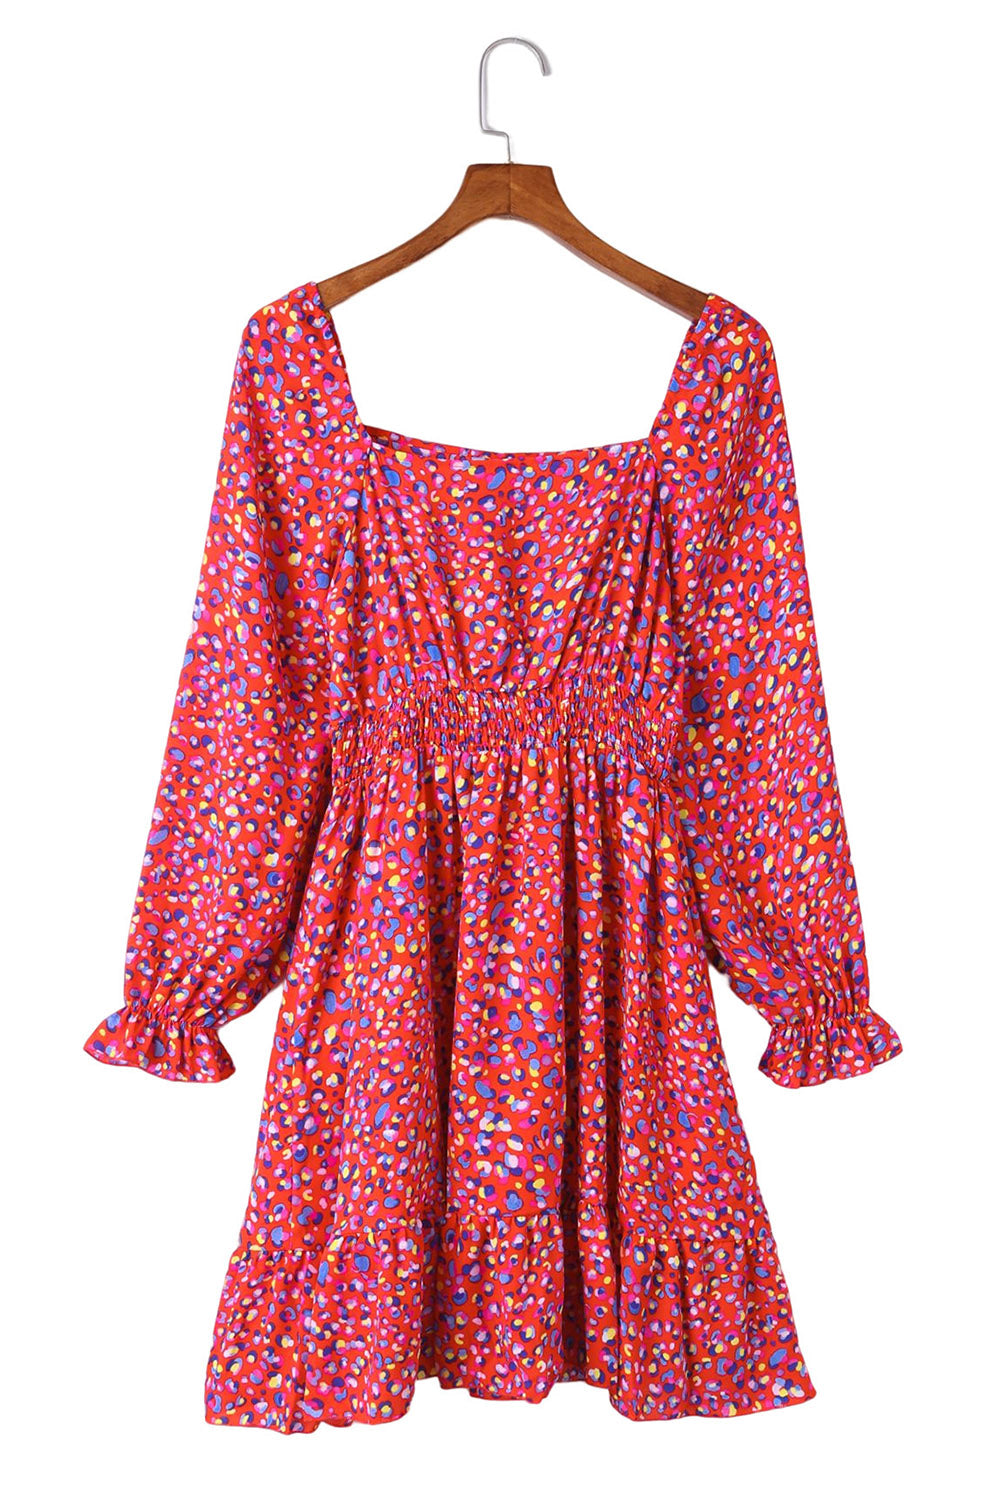 Fiery Red Square Neck Spring Floral Dress